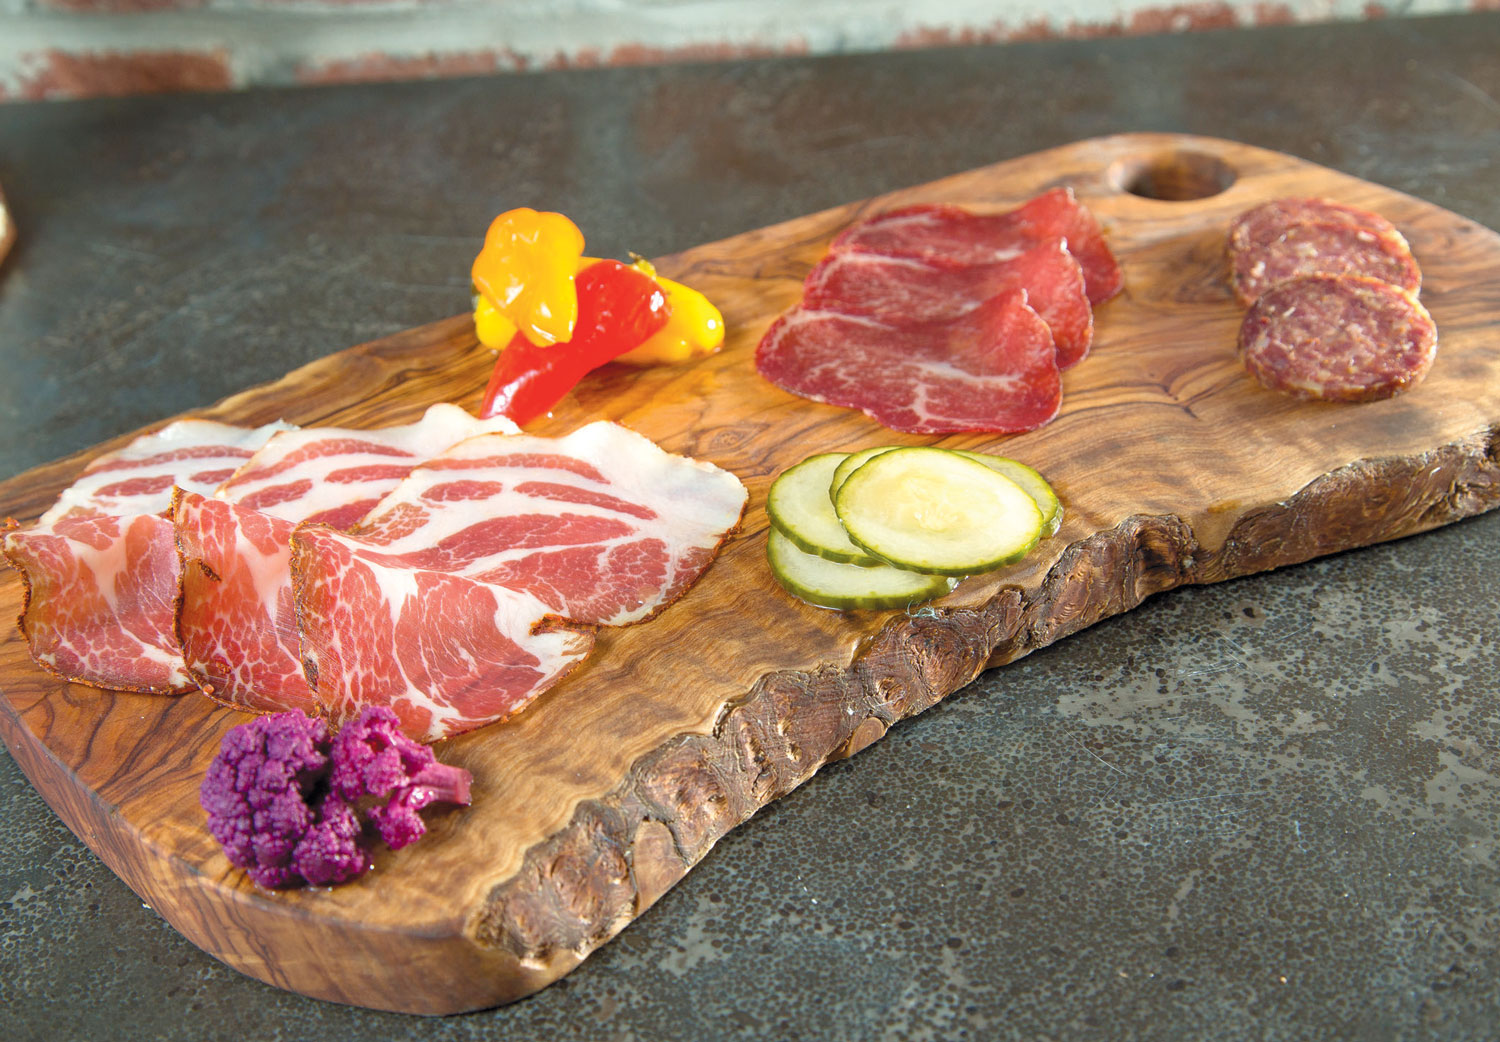 selection of salumi (cured meats) on a plank with vegetables